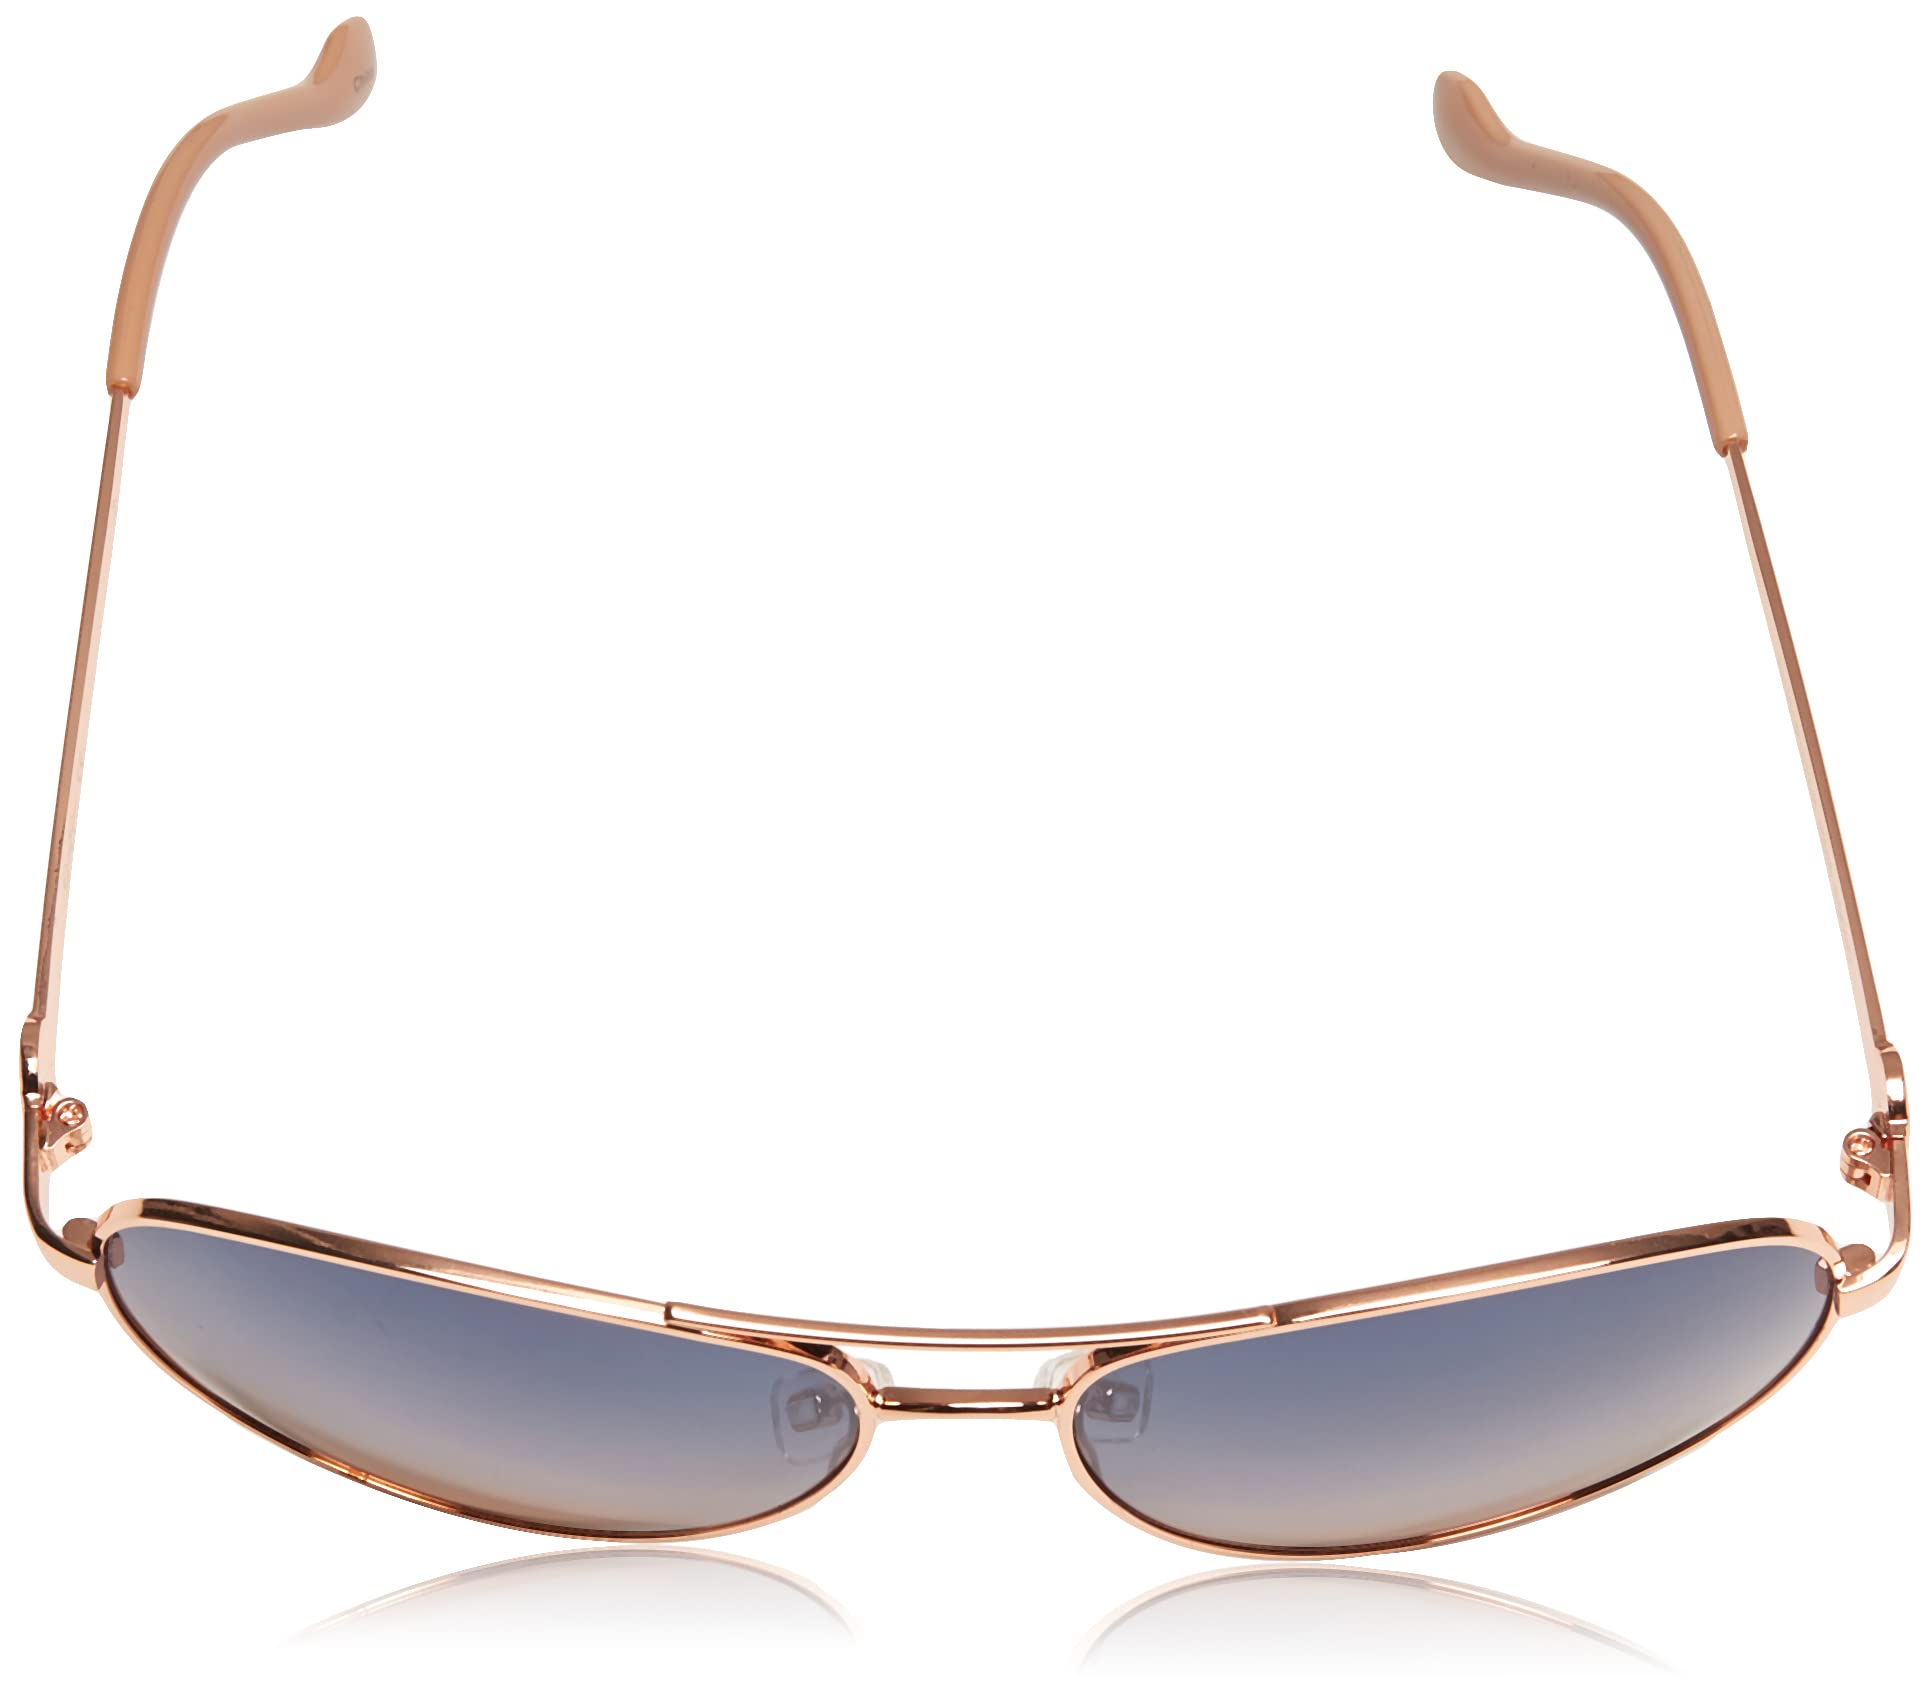 Jessica Simpson J5596 Stylish Women's Metal Aviator Pilot Sunglasses with 100% Uv Protection. Glam Gifts for Her, 60 Mm